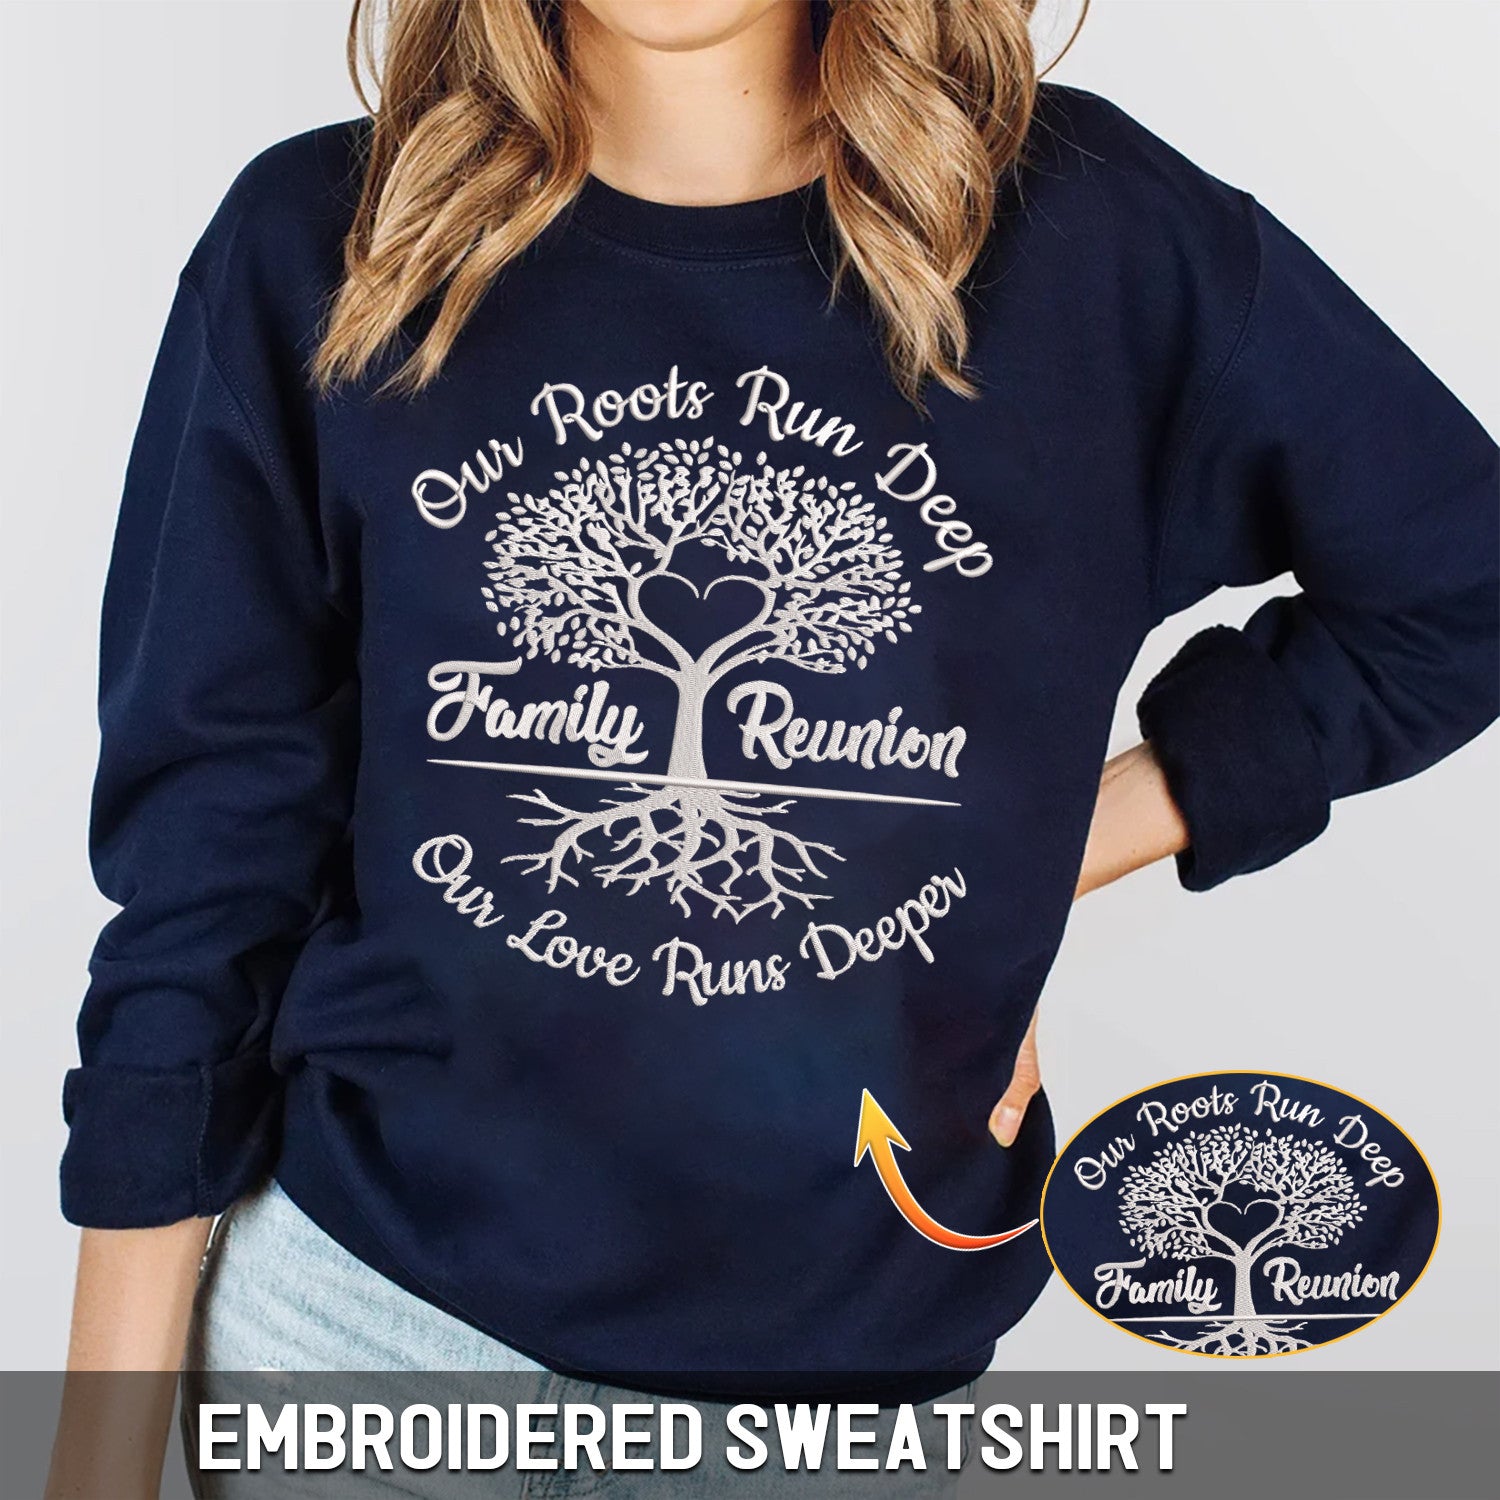 Embroidered Family Shirt